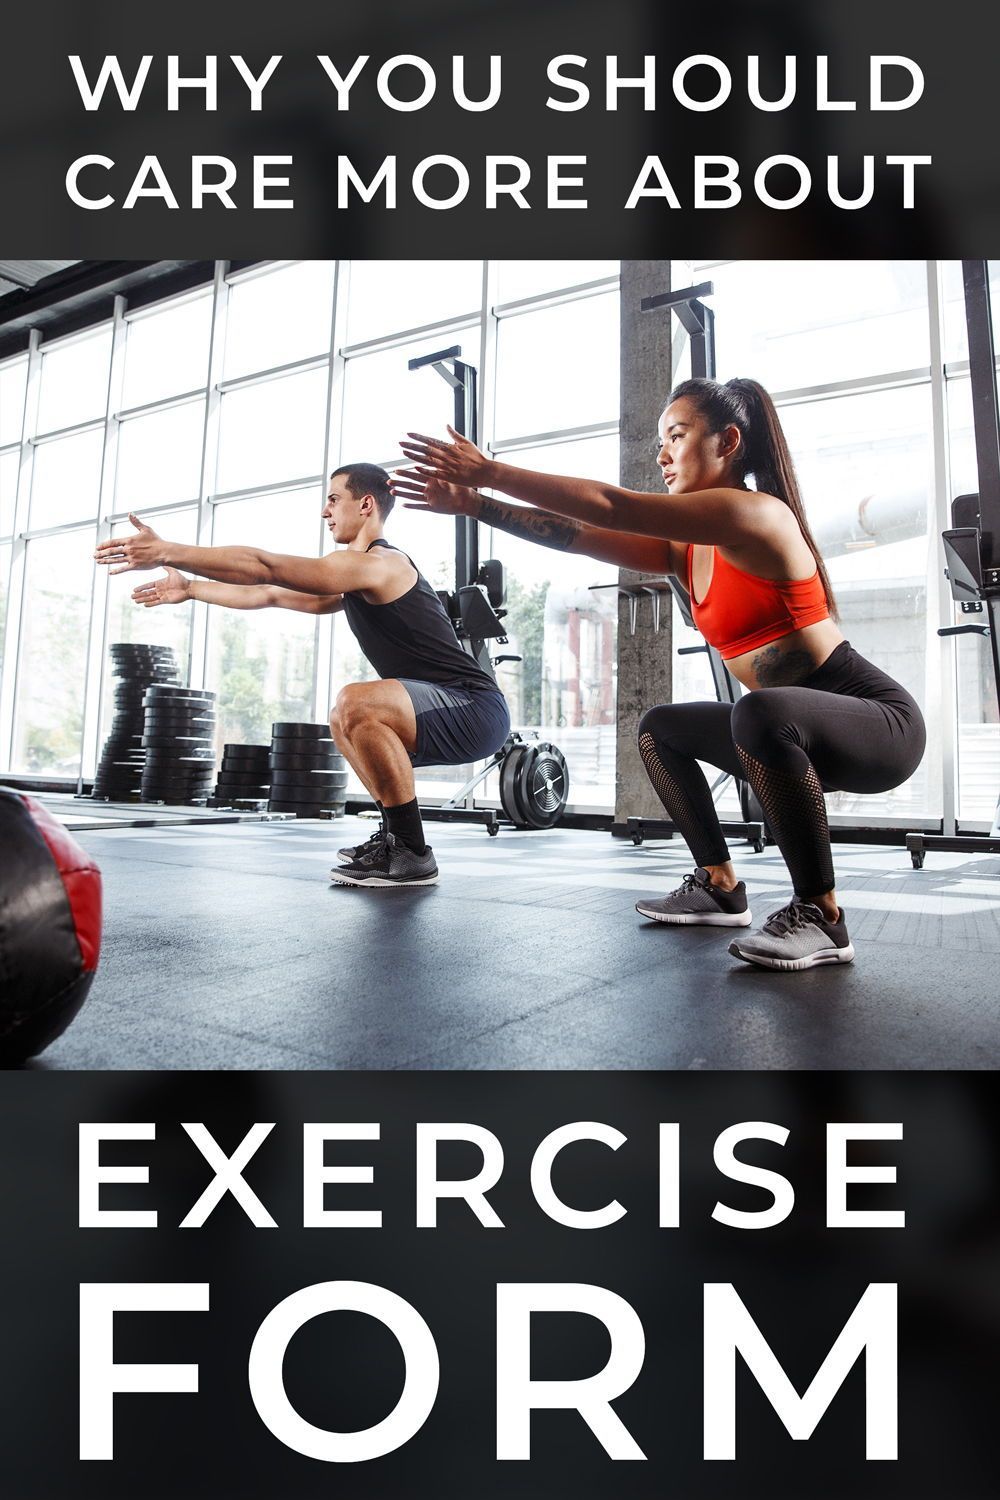 Why Your Exercise Form is Important - Sunny Health & Fitness -   18 fitness Exercises articles ideas